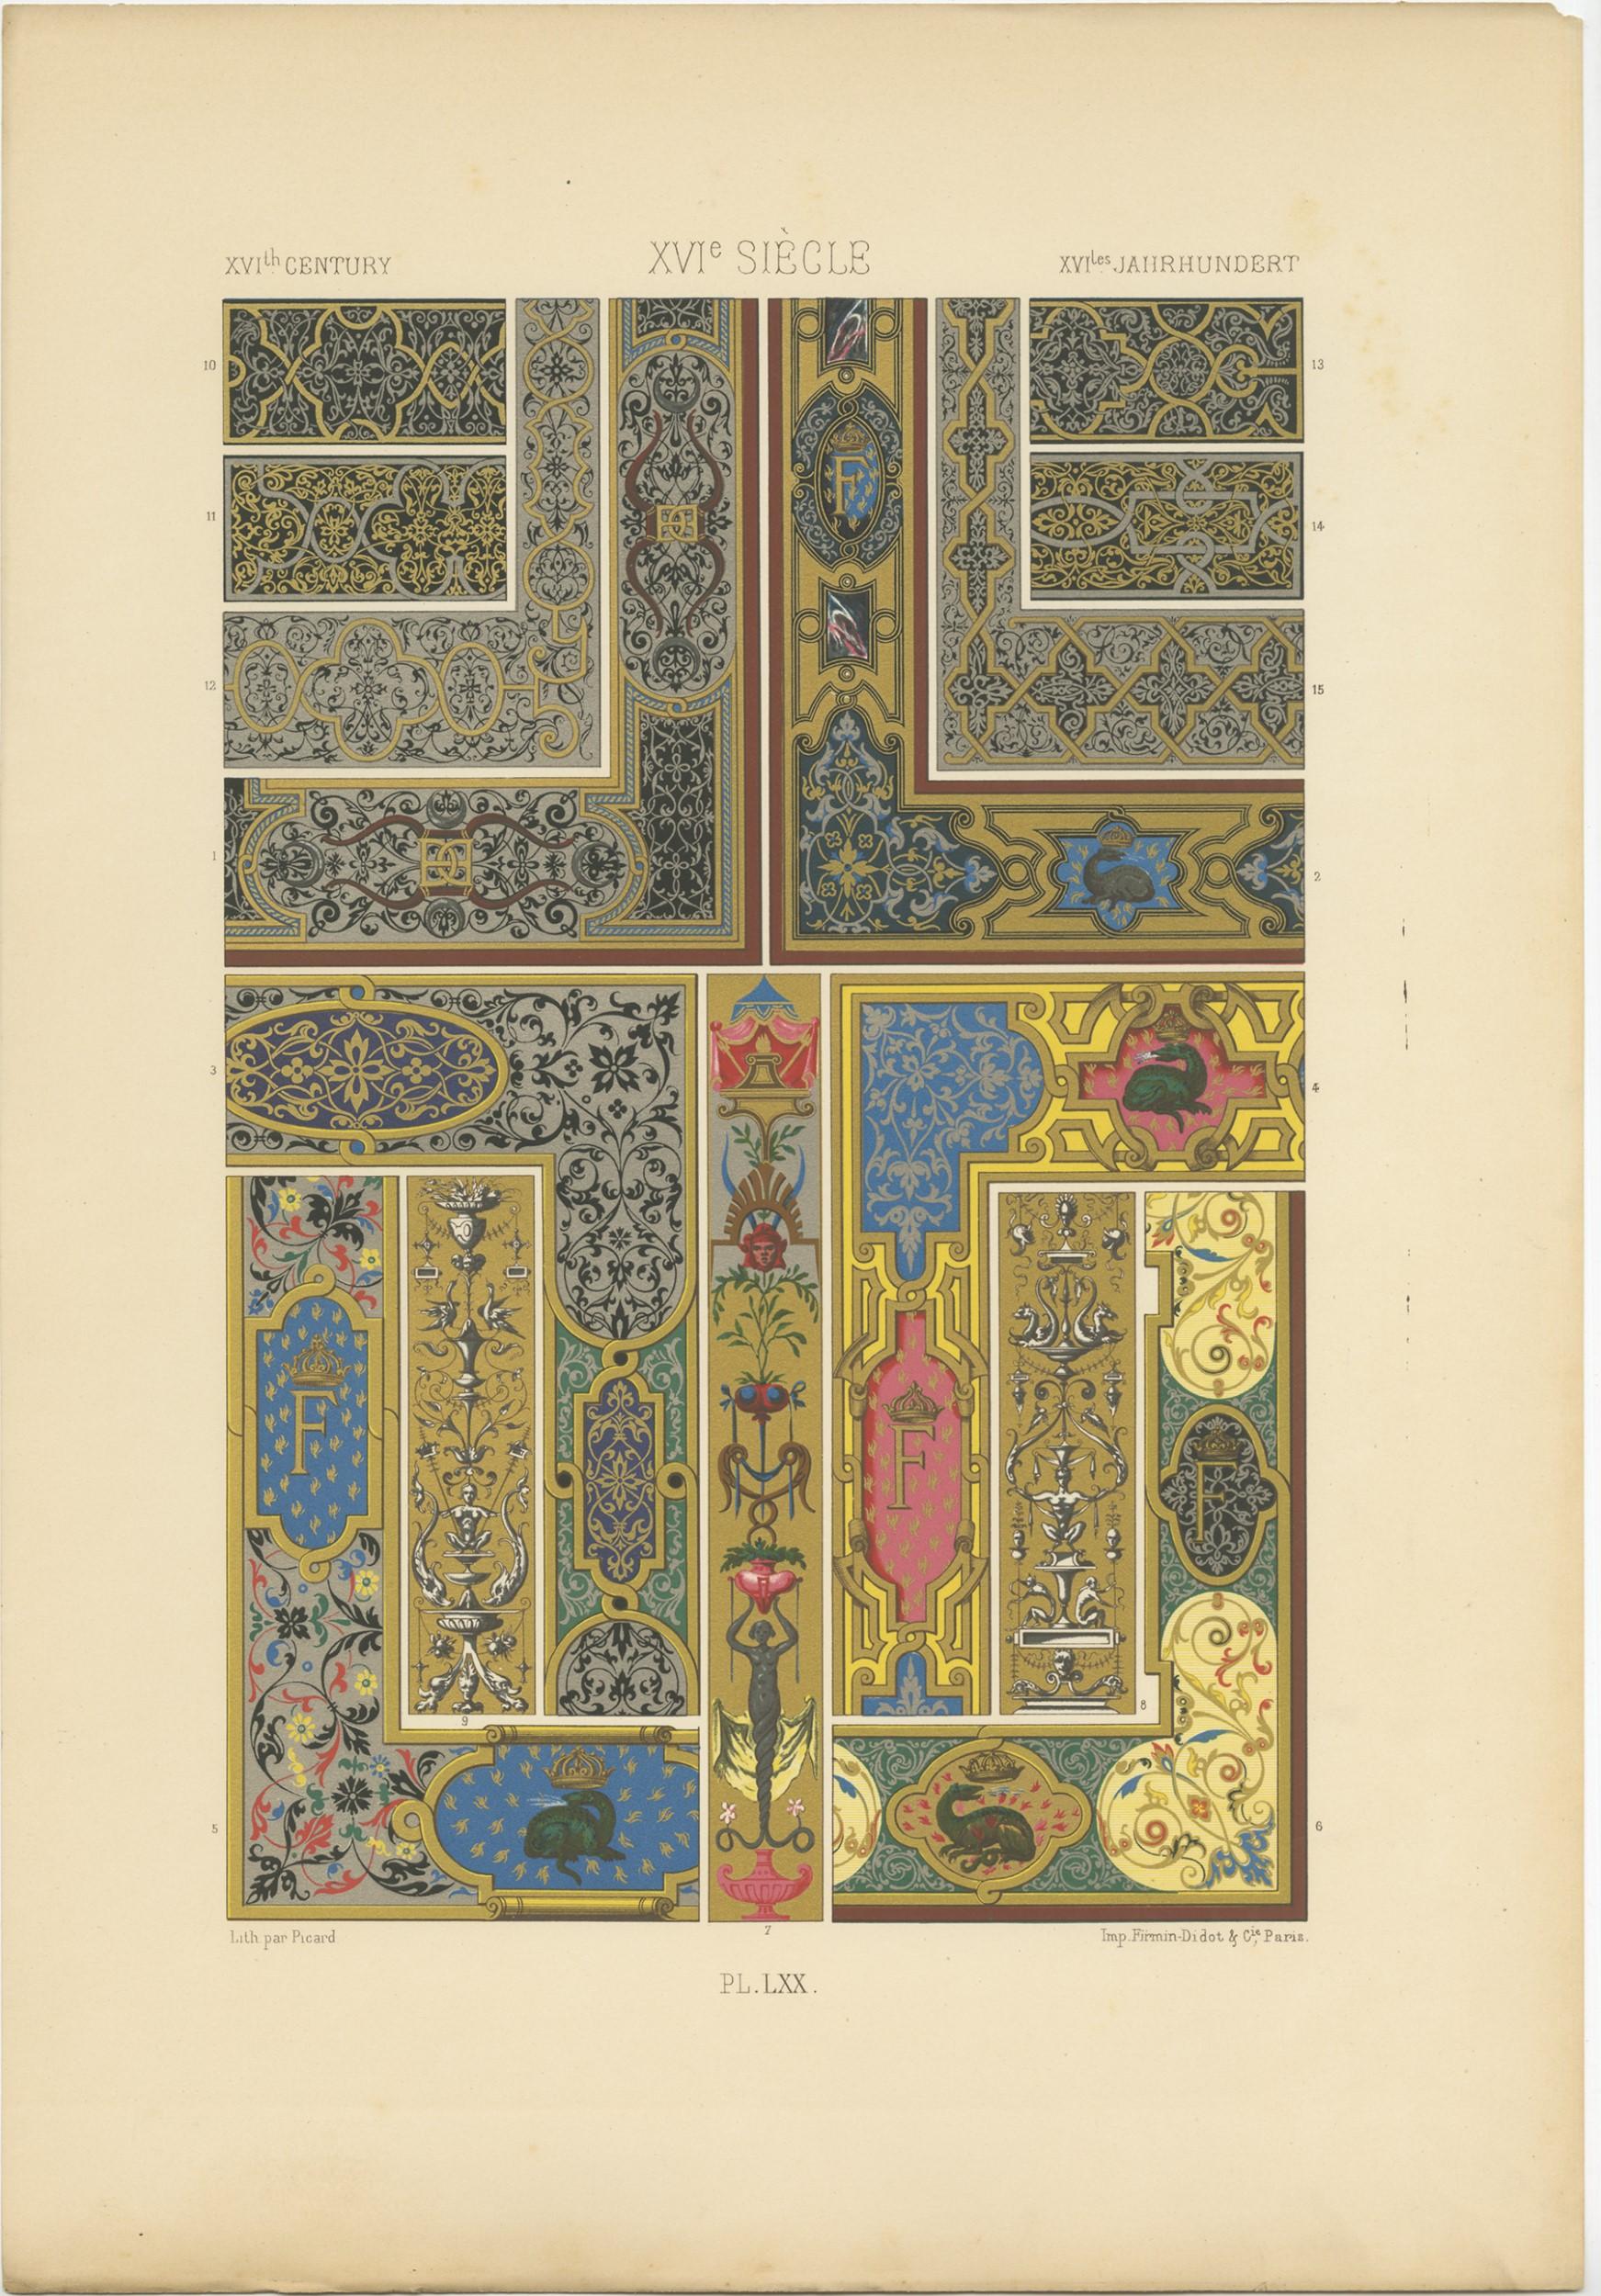 Antique print titled 'XVIth Century - XVIe Siécle - XVItes Jahrhundert'. Chromolithograph of XVIth Century ornaments and decorative arts. This print originates from 'l'Ornement Polychrome' by Auguste Racinet. Published circa 1890.